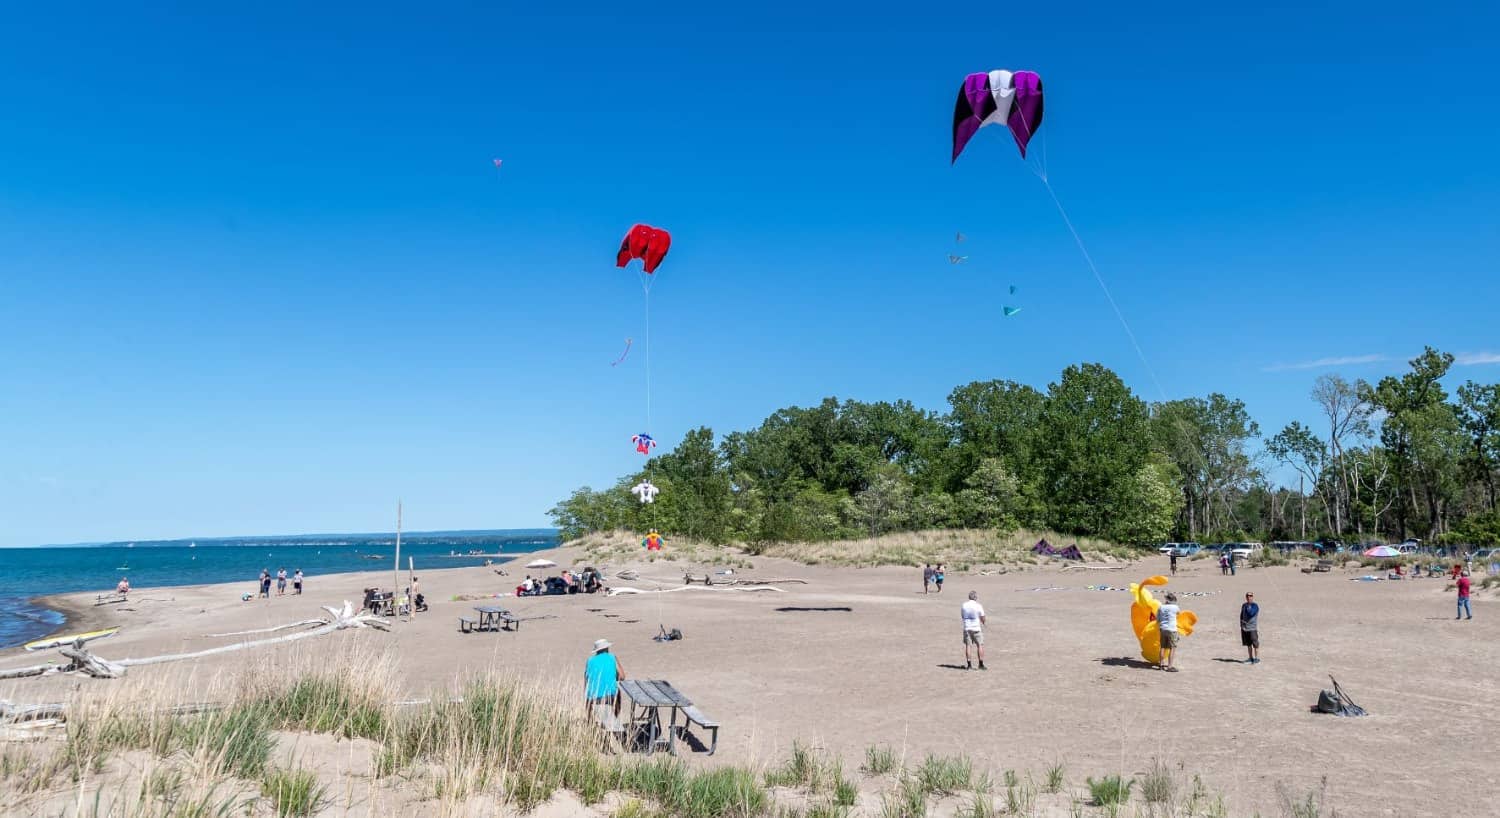 People walking and flying kites on a beach near the water